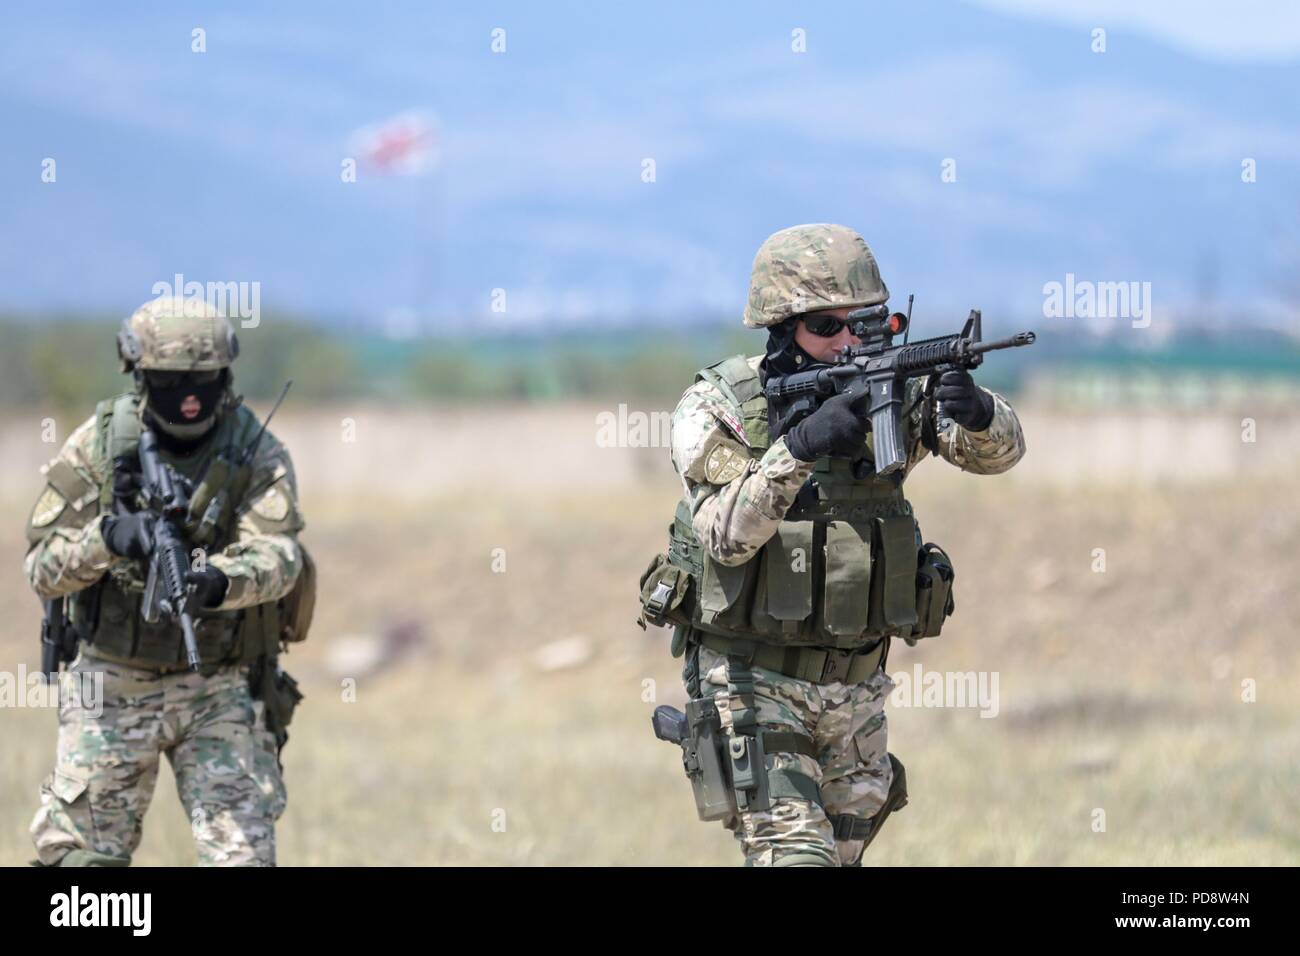 Georgian Armed Forces special forces move towards the objective after aerial insertion during an urban operations exercise at the Vaziani Training Area on Aug. 5, 2018 during Noble Partner 18, August 5, 2018. Georgia is hosting the multinational U.S. Army Europe exercise to promote stability in the region and support strengthening their defense and internal operations U.S Army photo by Staff Sgt. R. J. Lannom Jr. () Stock Photo